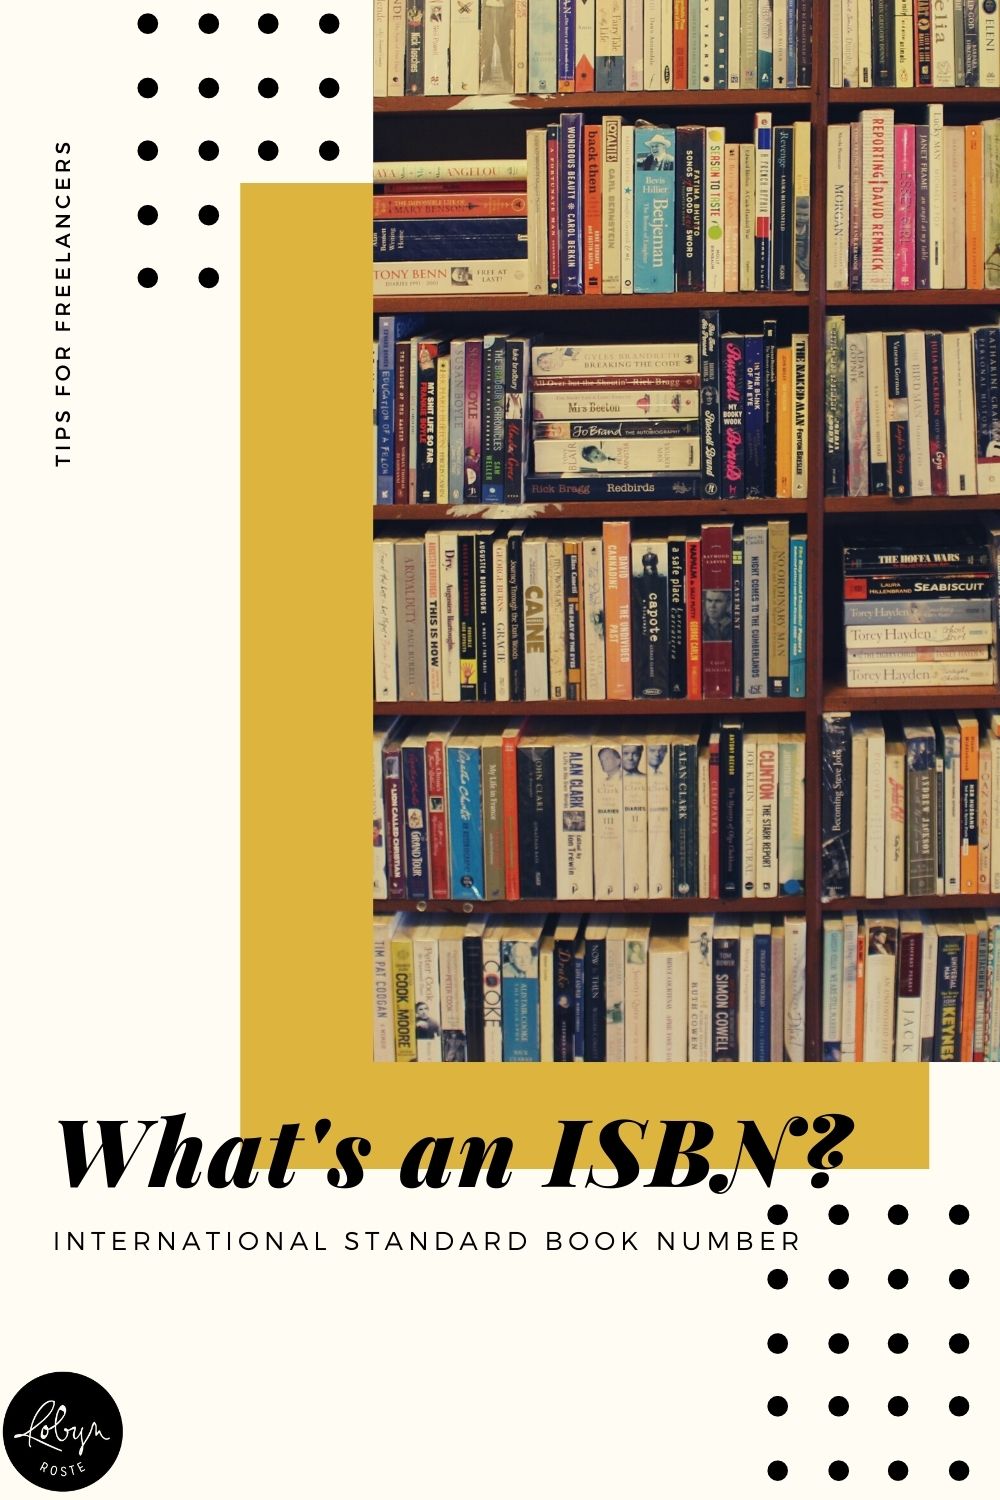 What's an ISBN? It's an industry acronym, short for International Standard Book Number. Just know that ISBN is a number your book gets when you publish it.